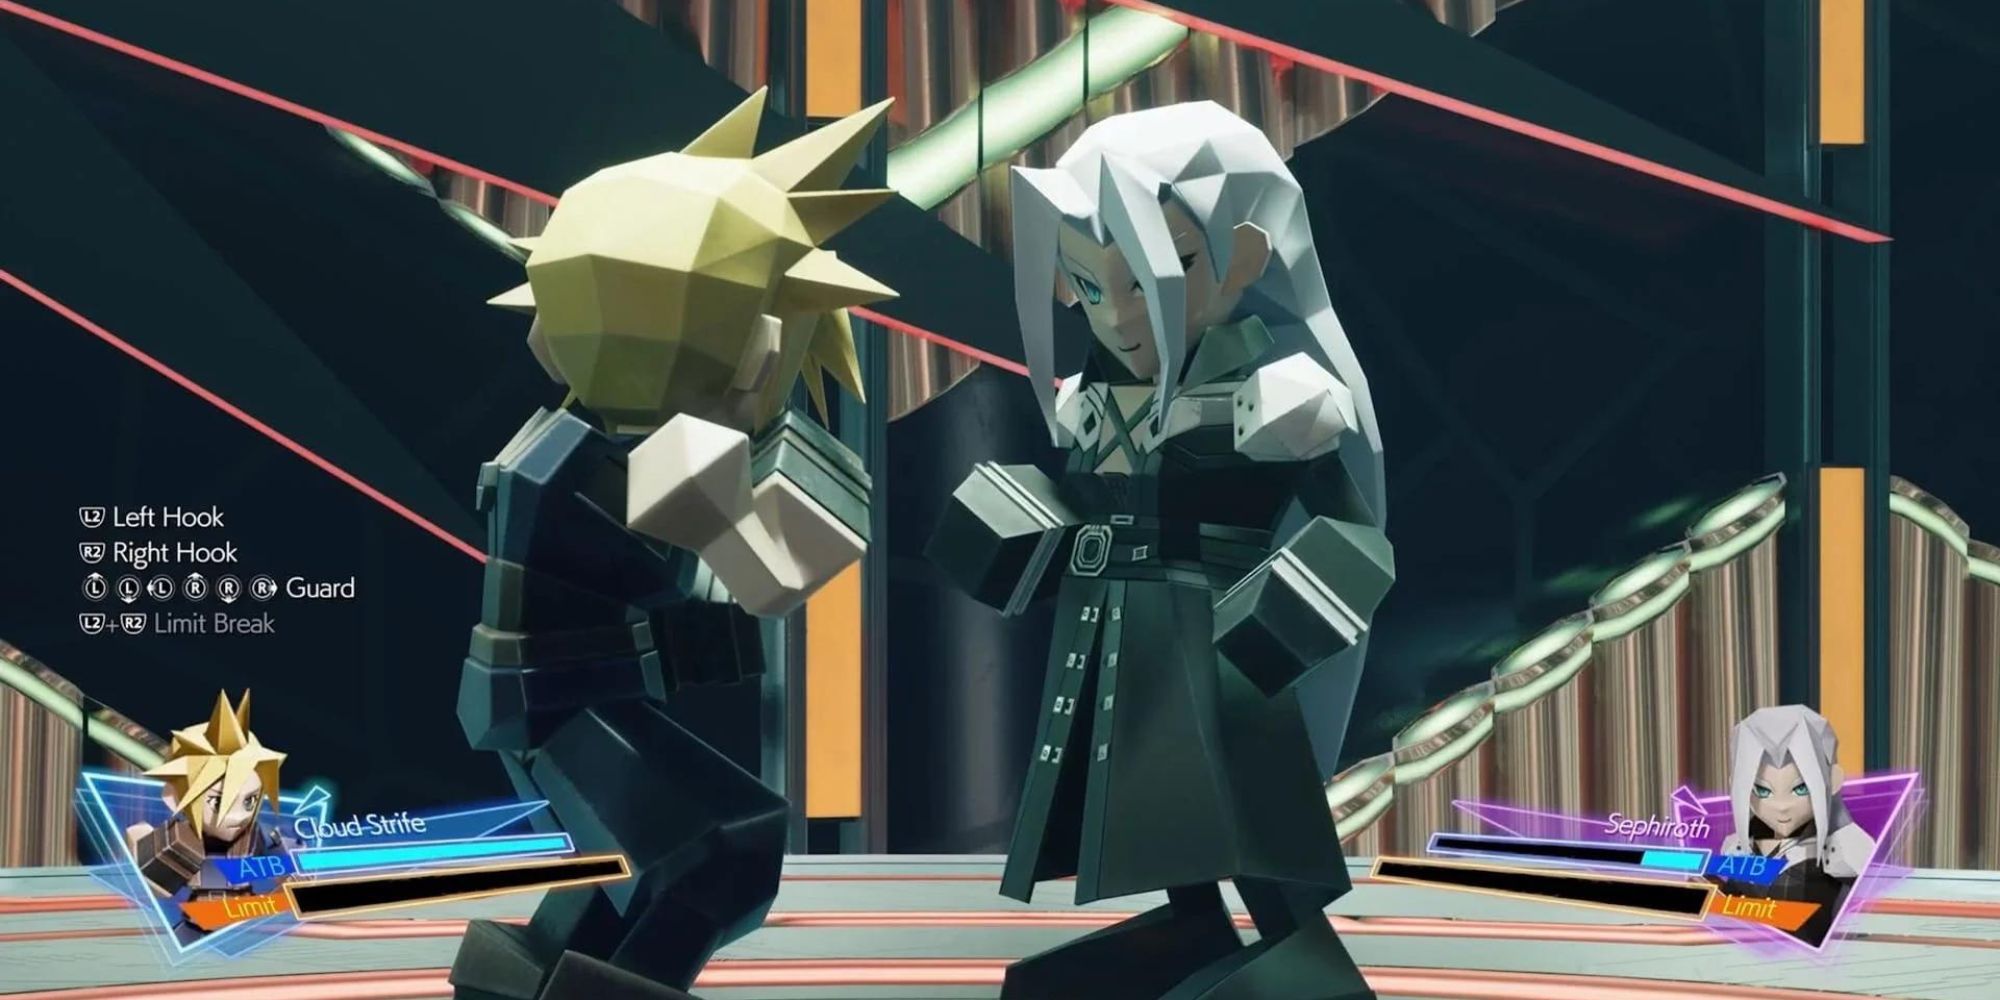 Screenshot from Final Fantasy 7 Rebirth of Polygon figures of Cloud and Sephiroth have a boxing match.